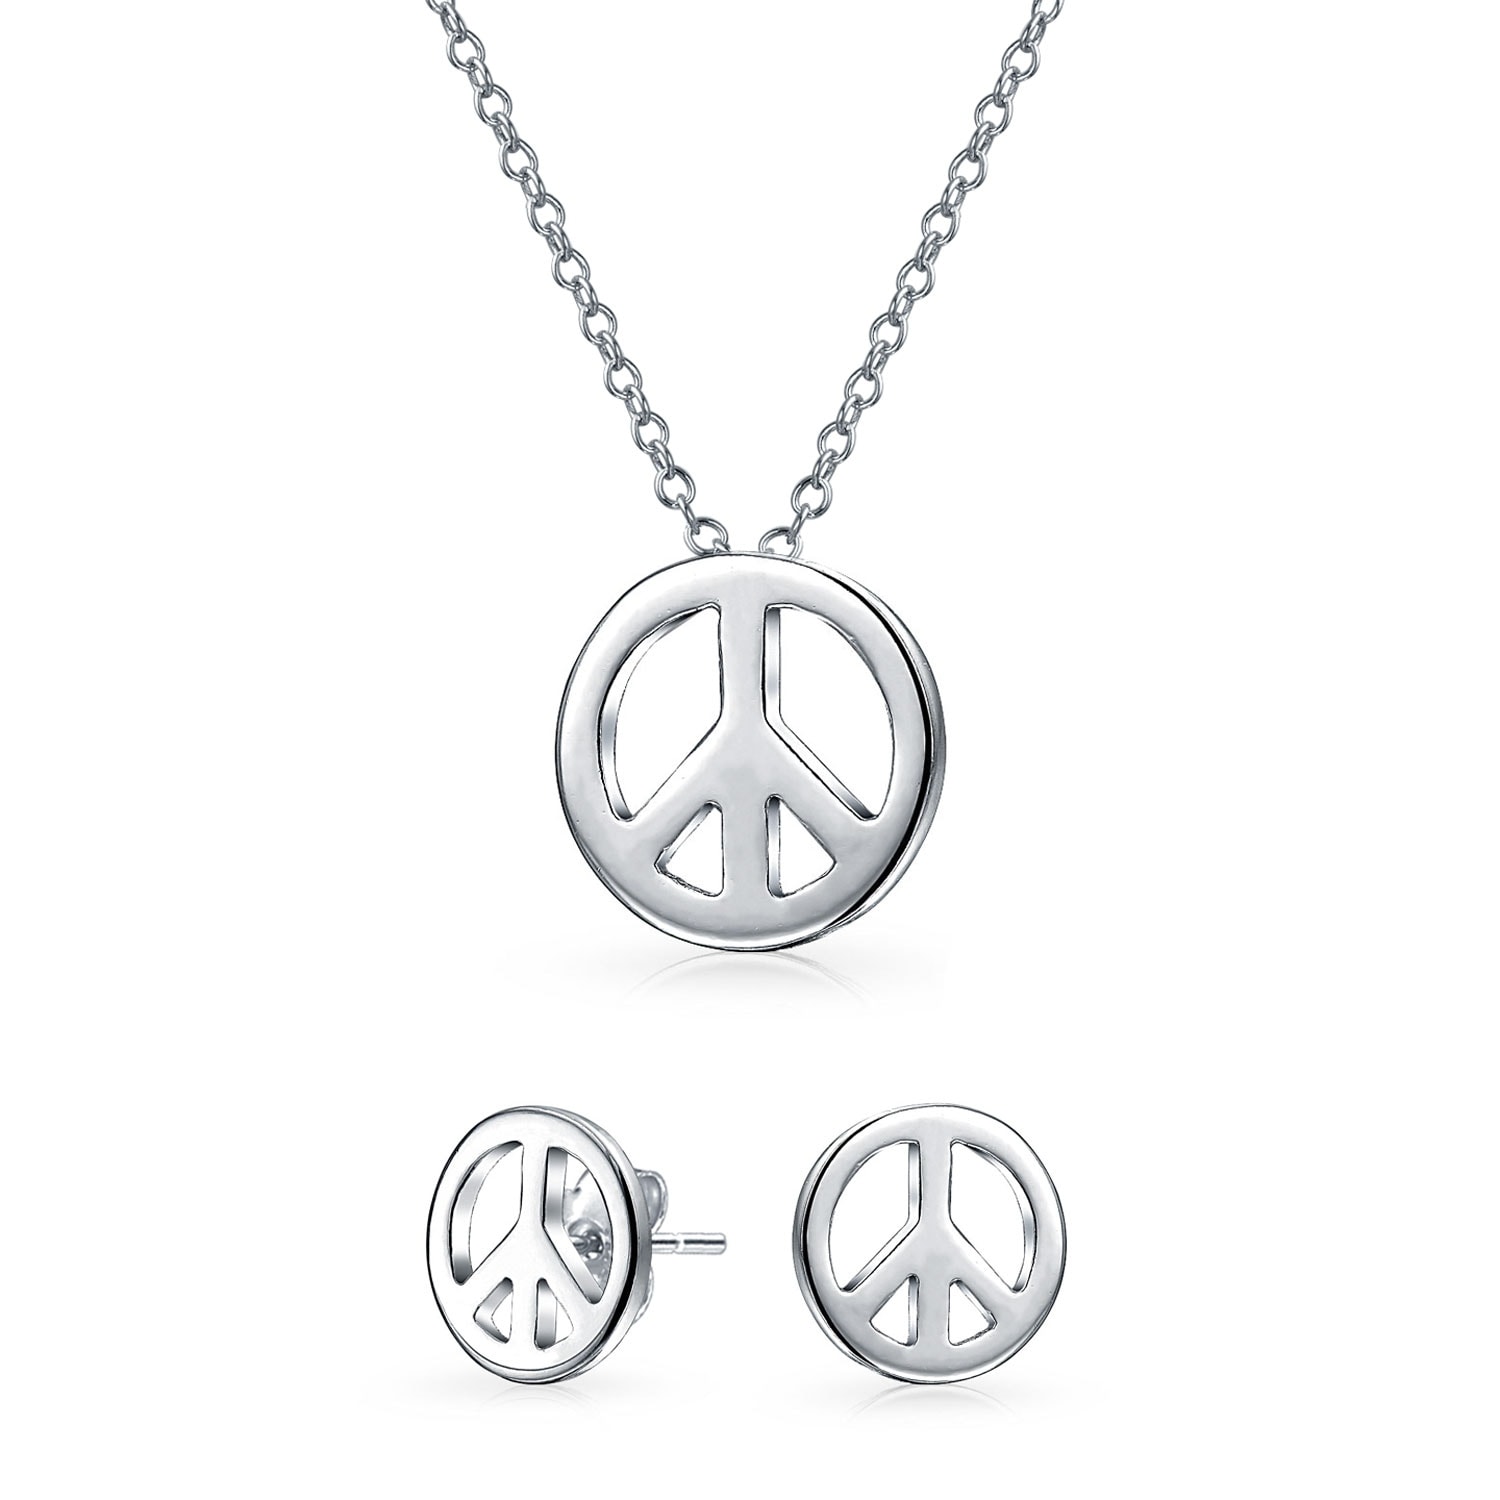 925 Sterling silver PEACE SIGN Symbol bead clip on charm pendant